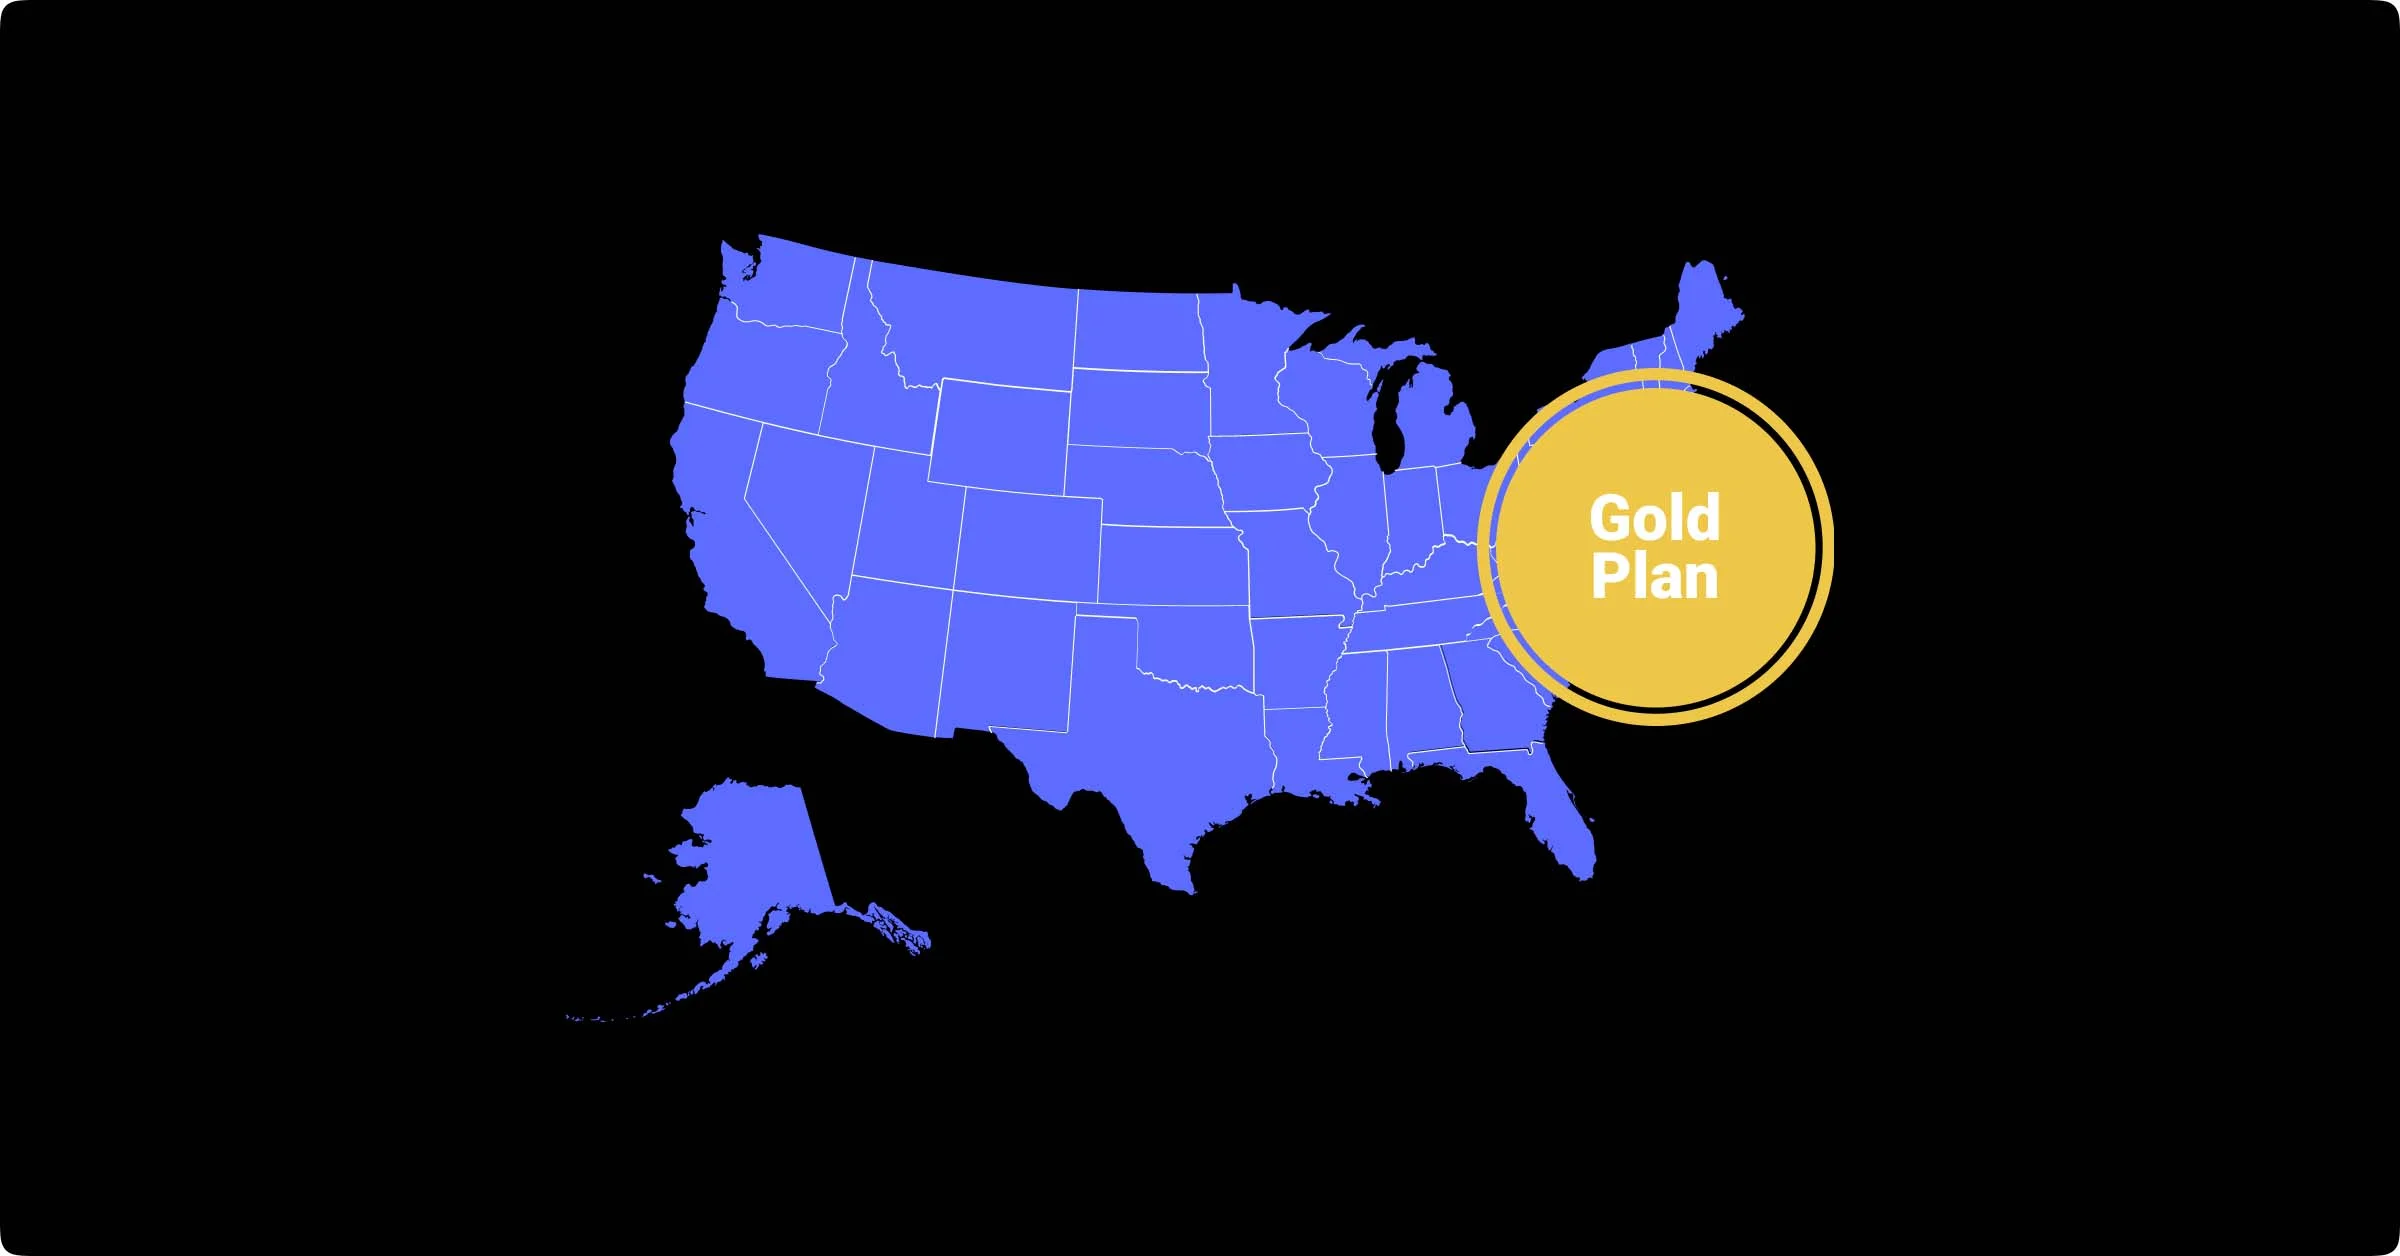 Gold Plans by State